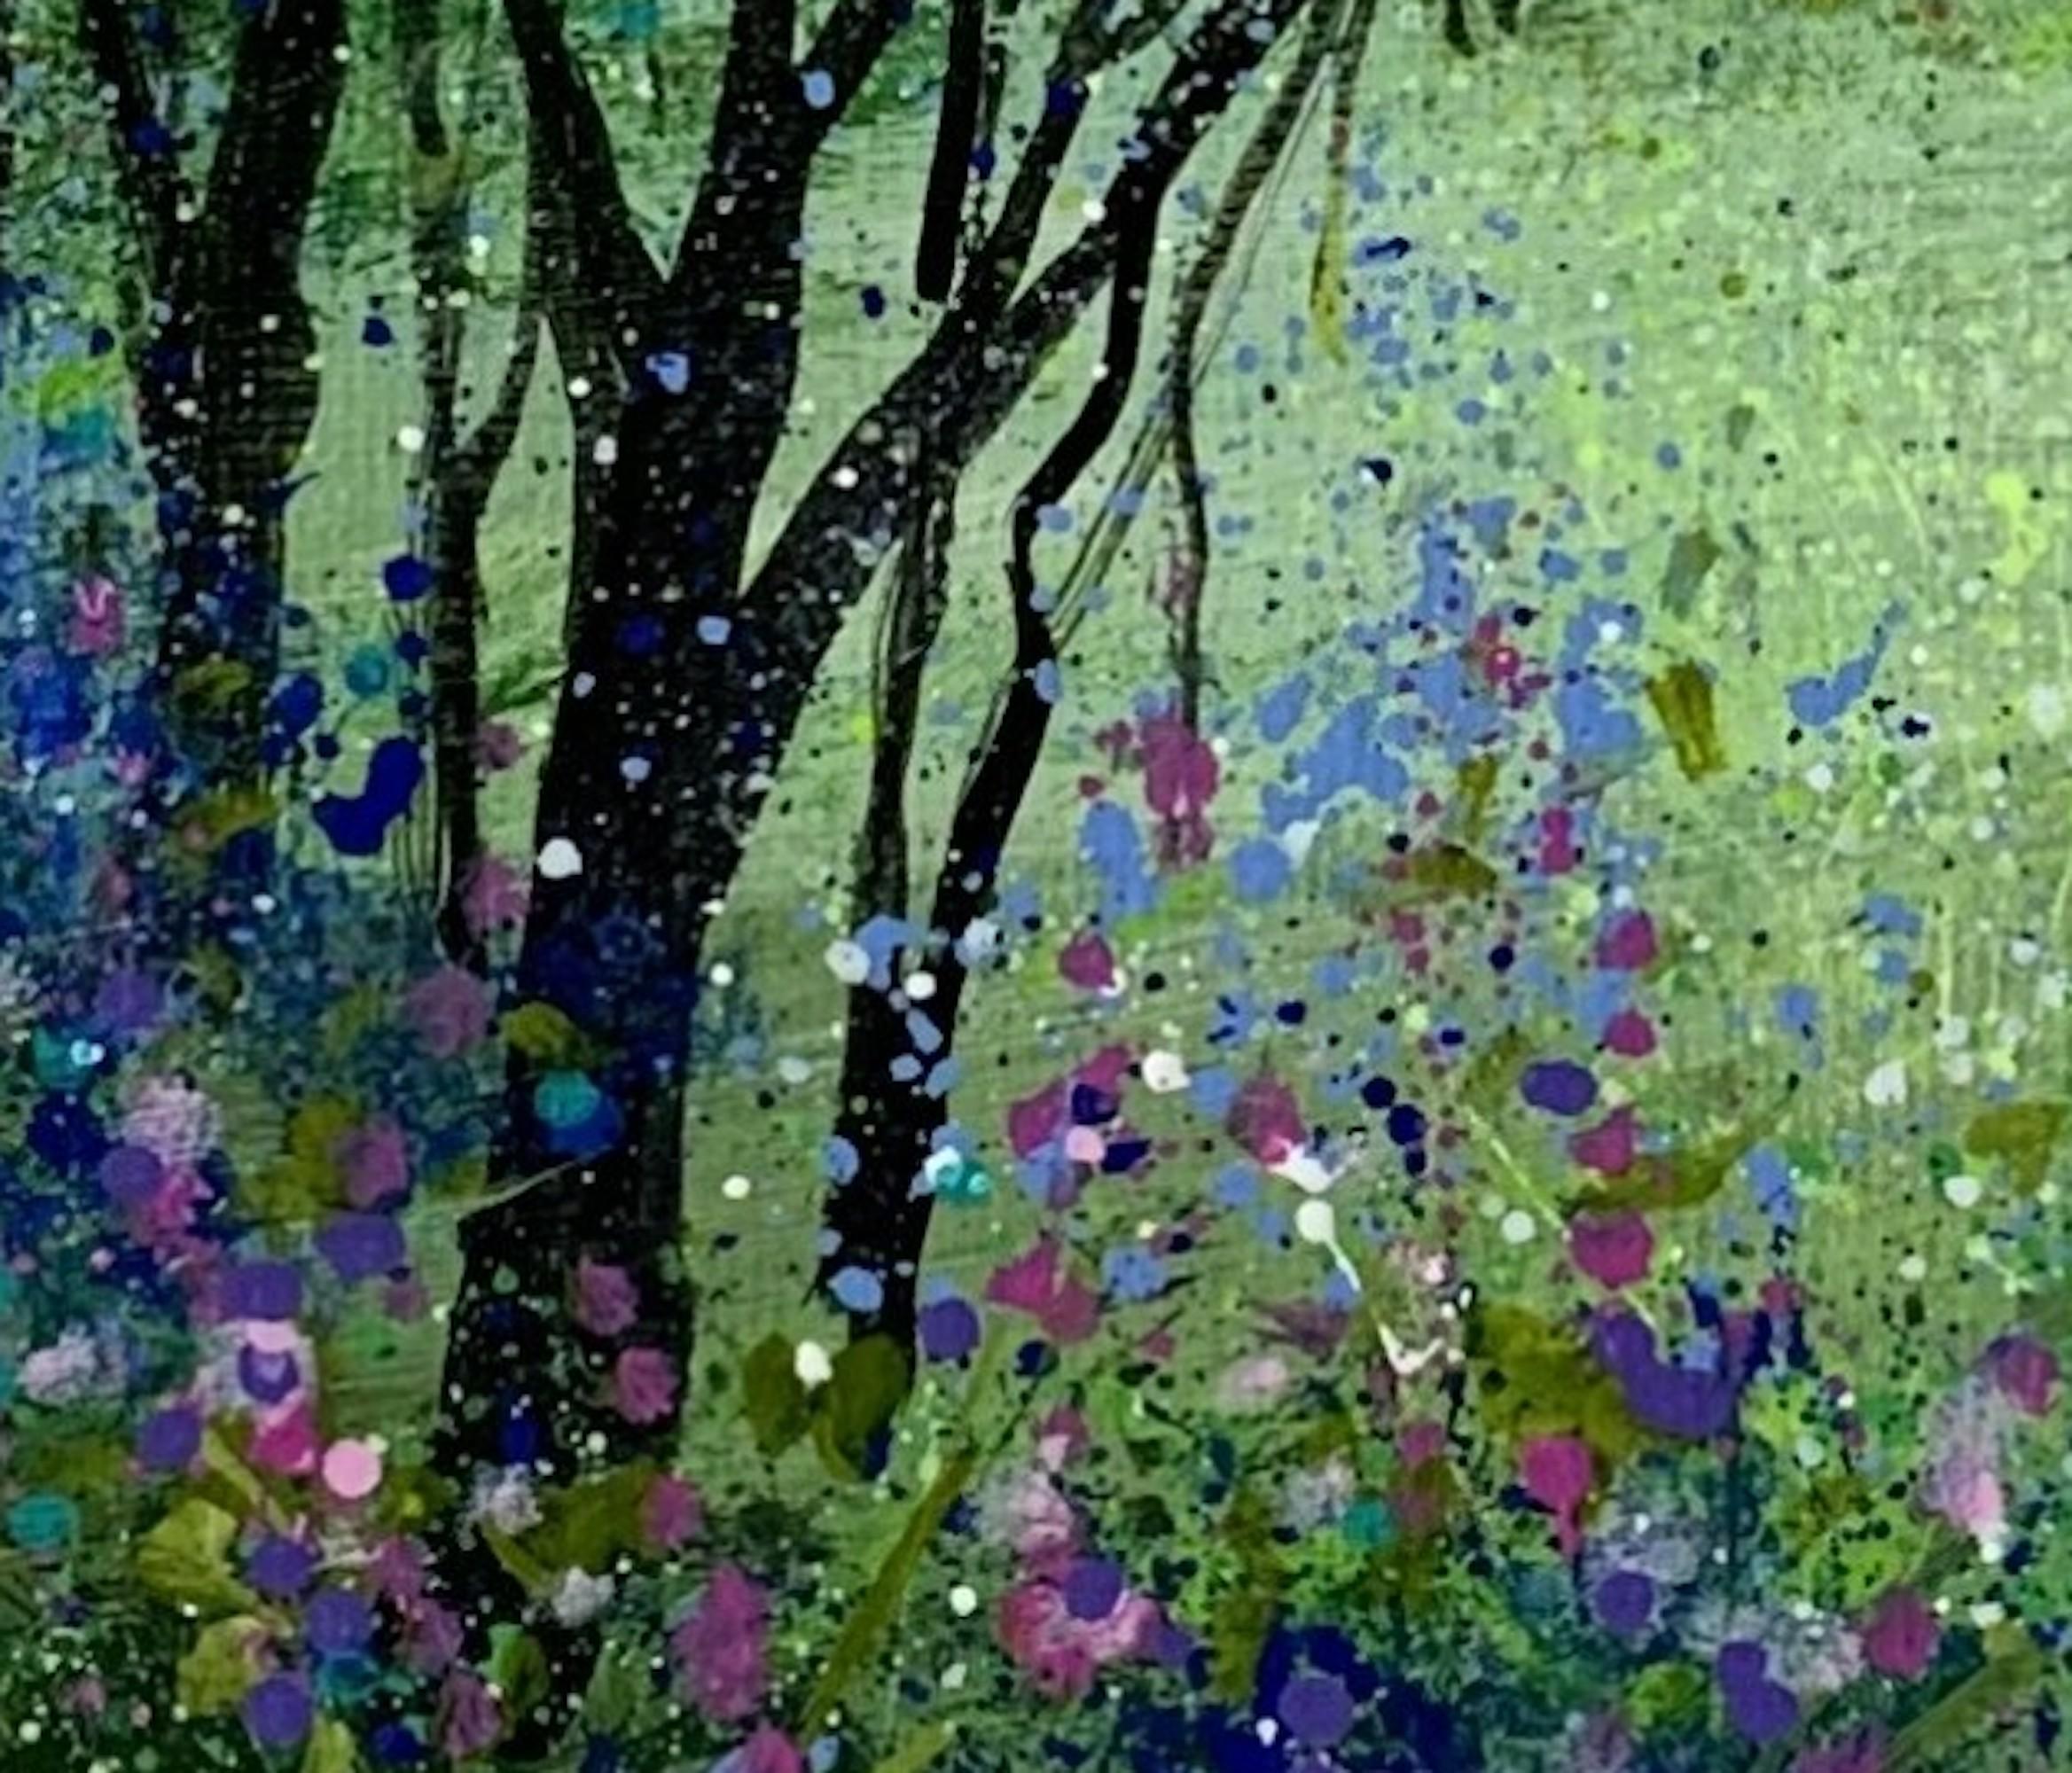 'Enchanted Bluebells' by Jan Rogers is an original work. The piece depicts an enchanting bluebell woodland, dusky and atmospheric with a hint of pink in the sky. A small painting beautifully framed in a deep, white and wooden moulding. The essence